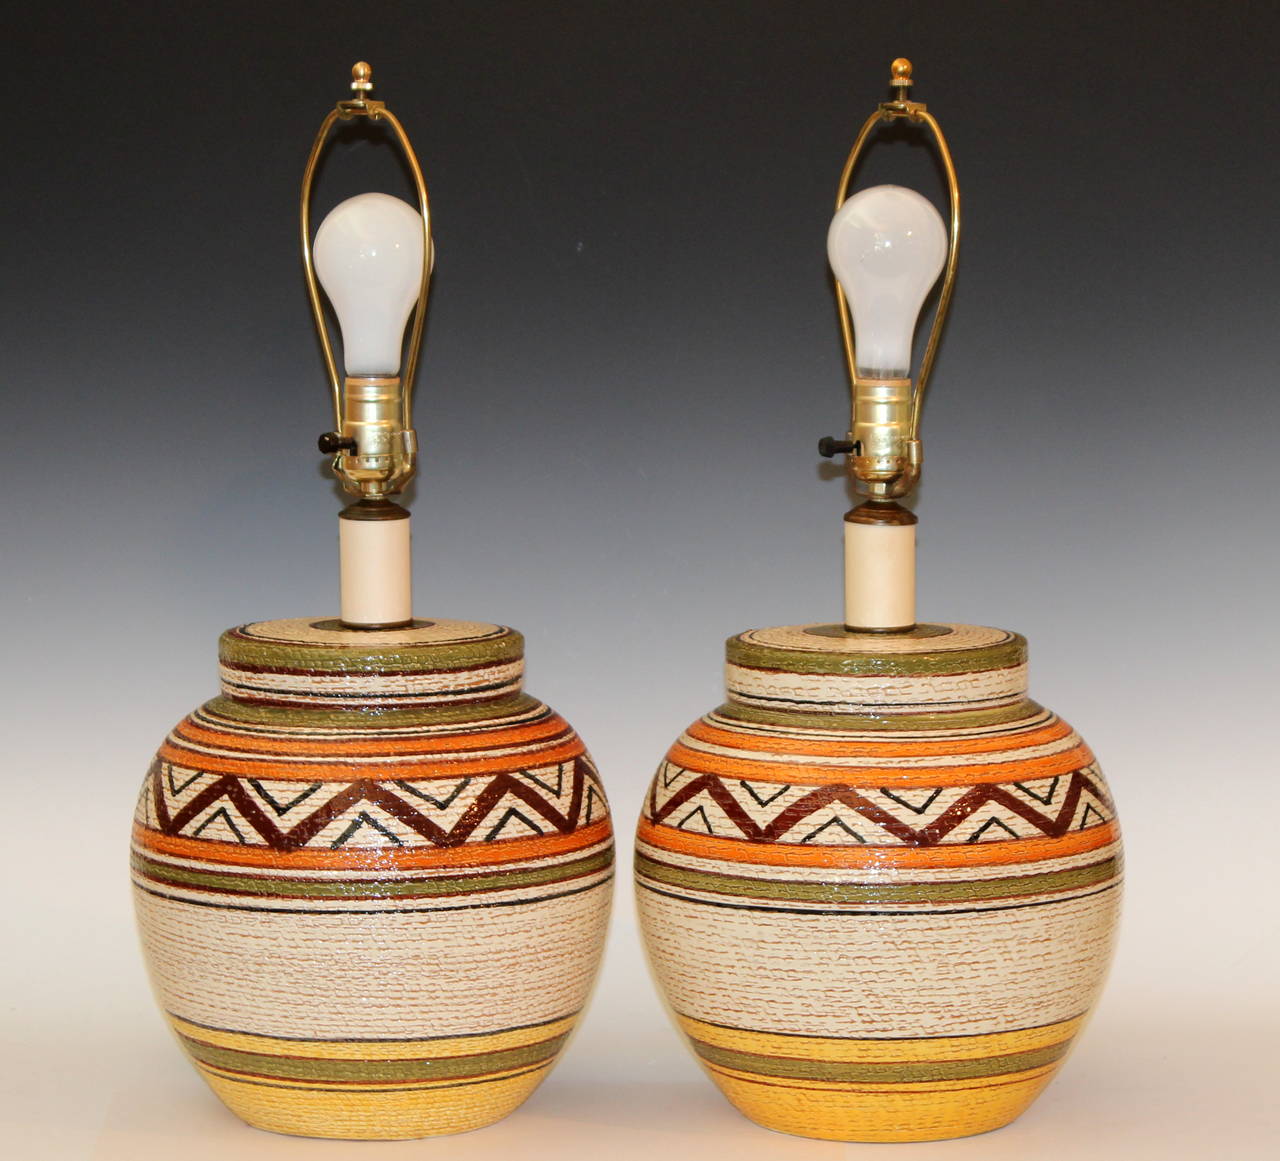 Large and heavy pair of hand-turned, vintage Bitossi lamps with earth colored glazes in geometric Navajo style tribal pattern over a basket weave ground, circa 1970s. Almost certainly made under the direction of Aldo Londi who had an affinity for